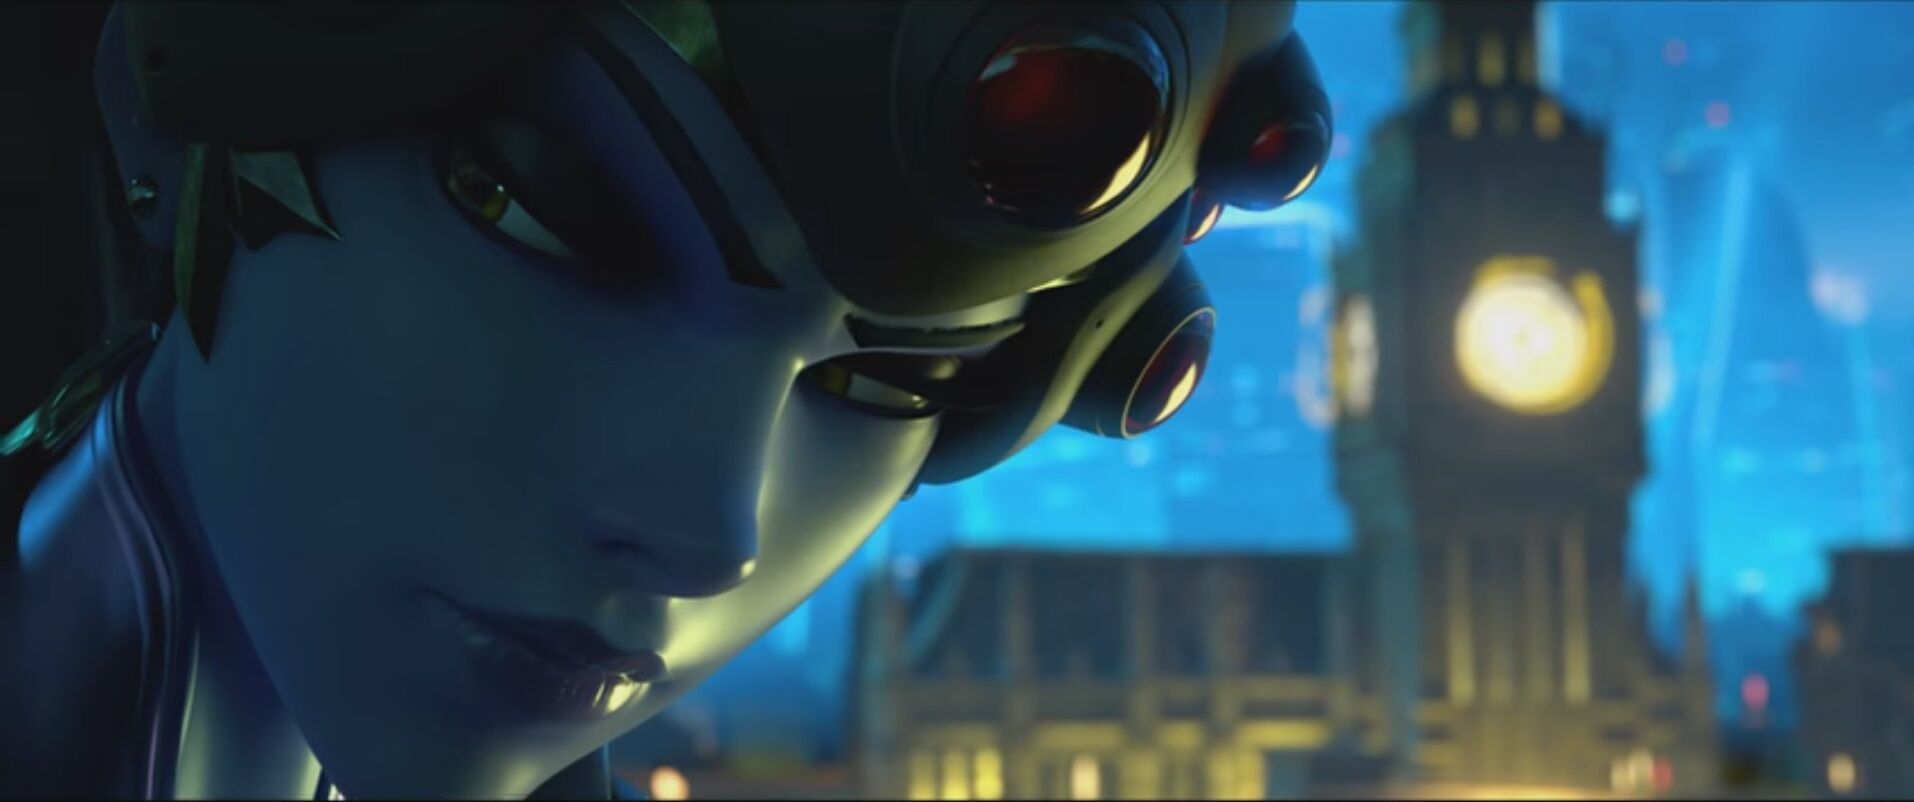 Overwatch Widowmaker Heroes of the Storm Video game Wiki, others